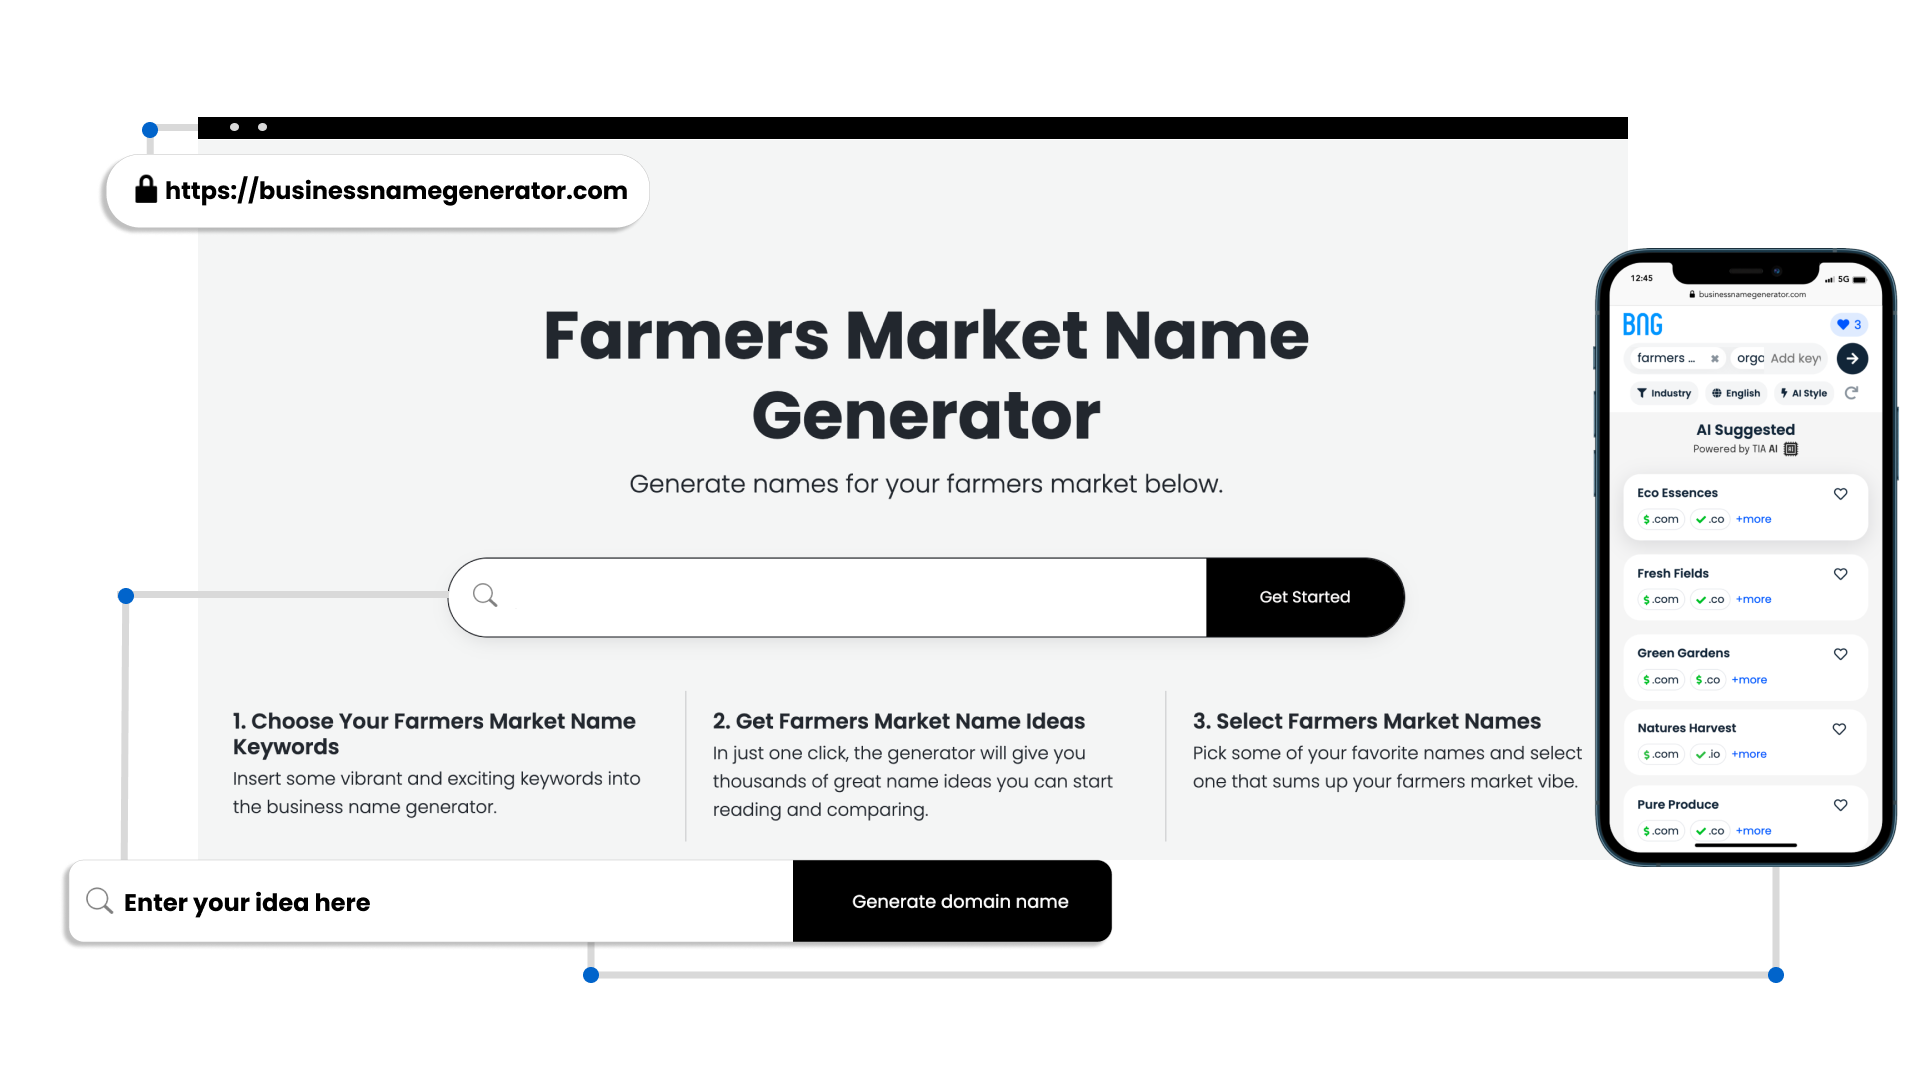 Benefits of Our Farmers Market Name Generator